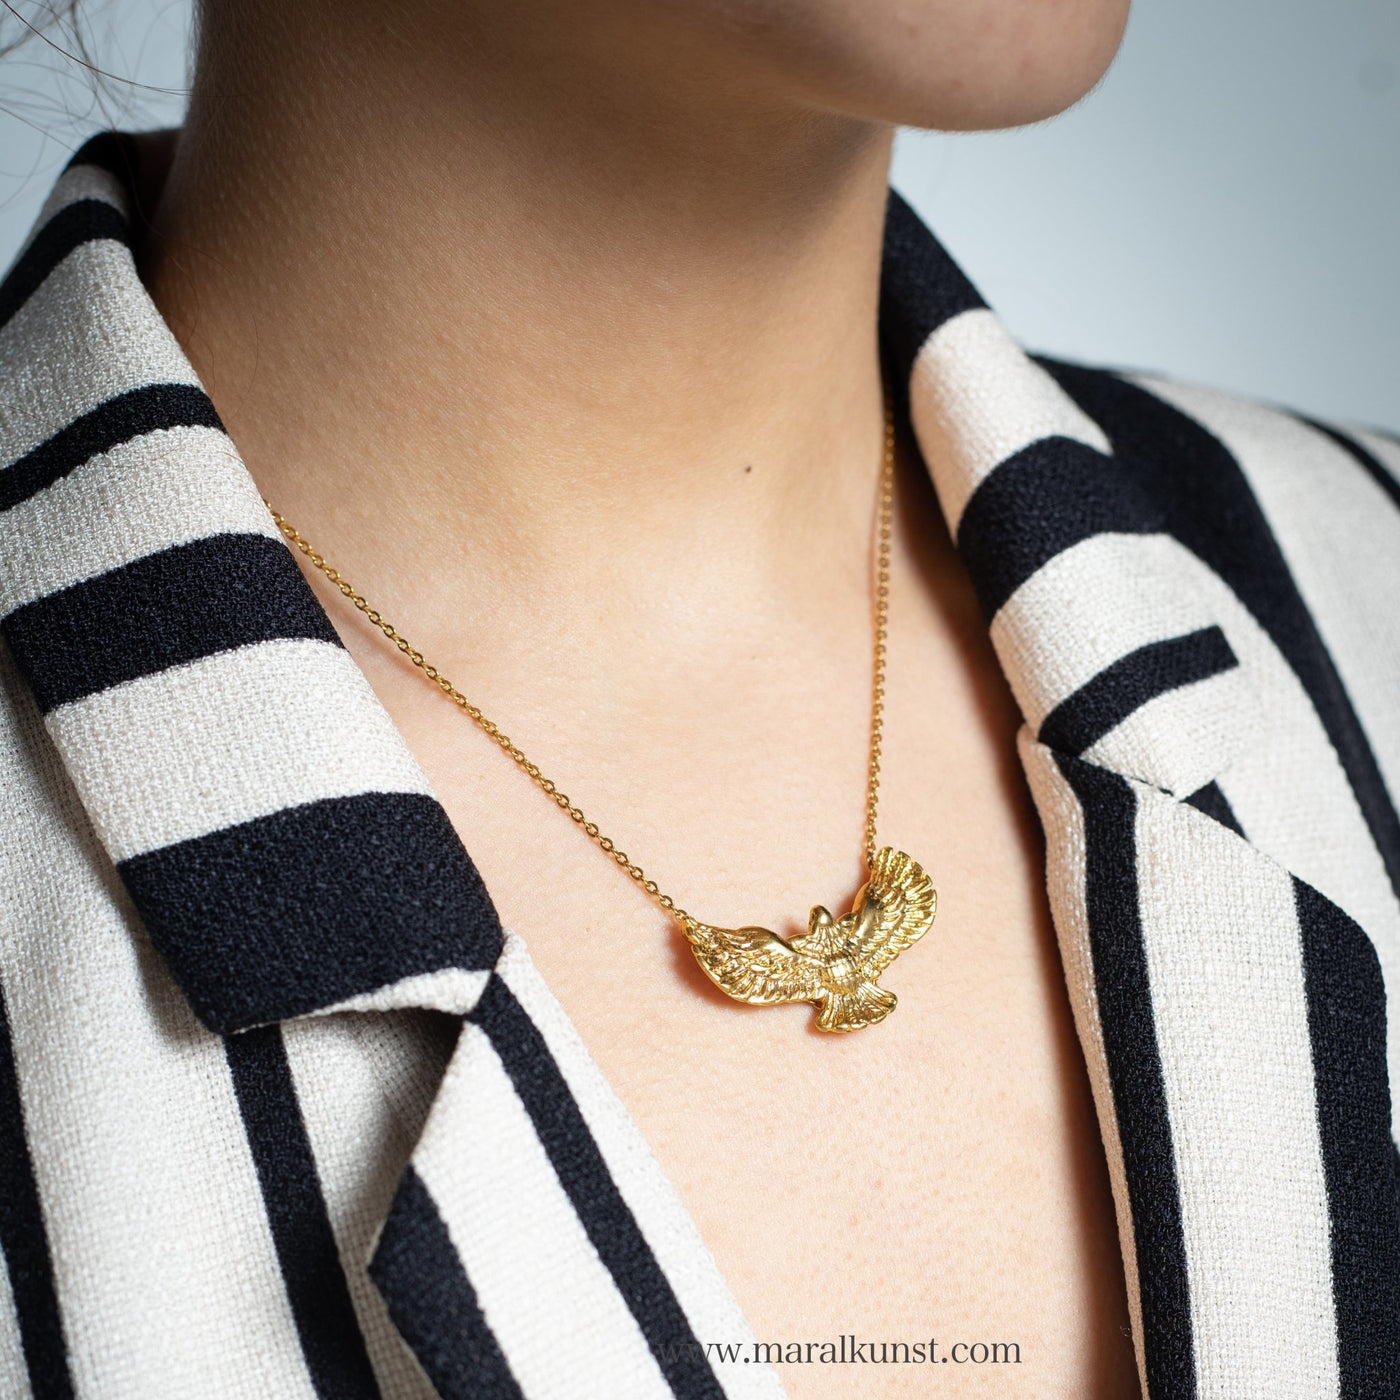 Flying Eagle Necklace - Maral Kunst Jewelry